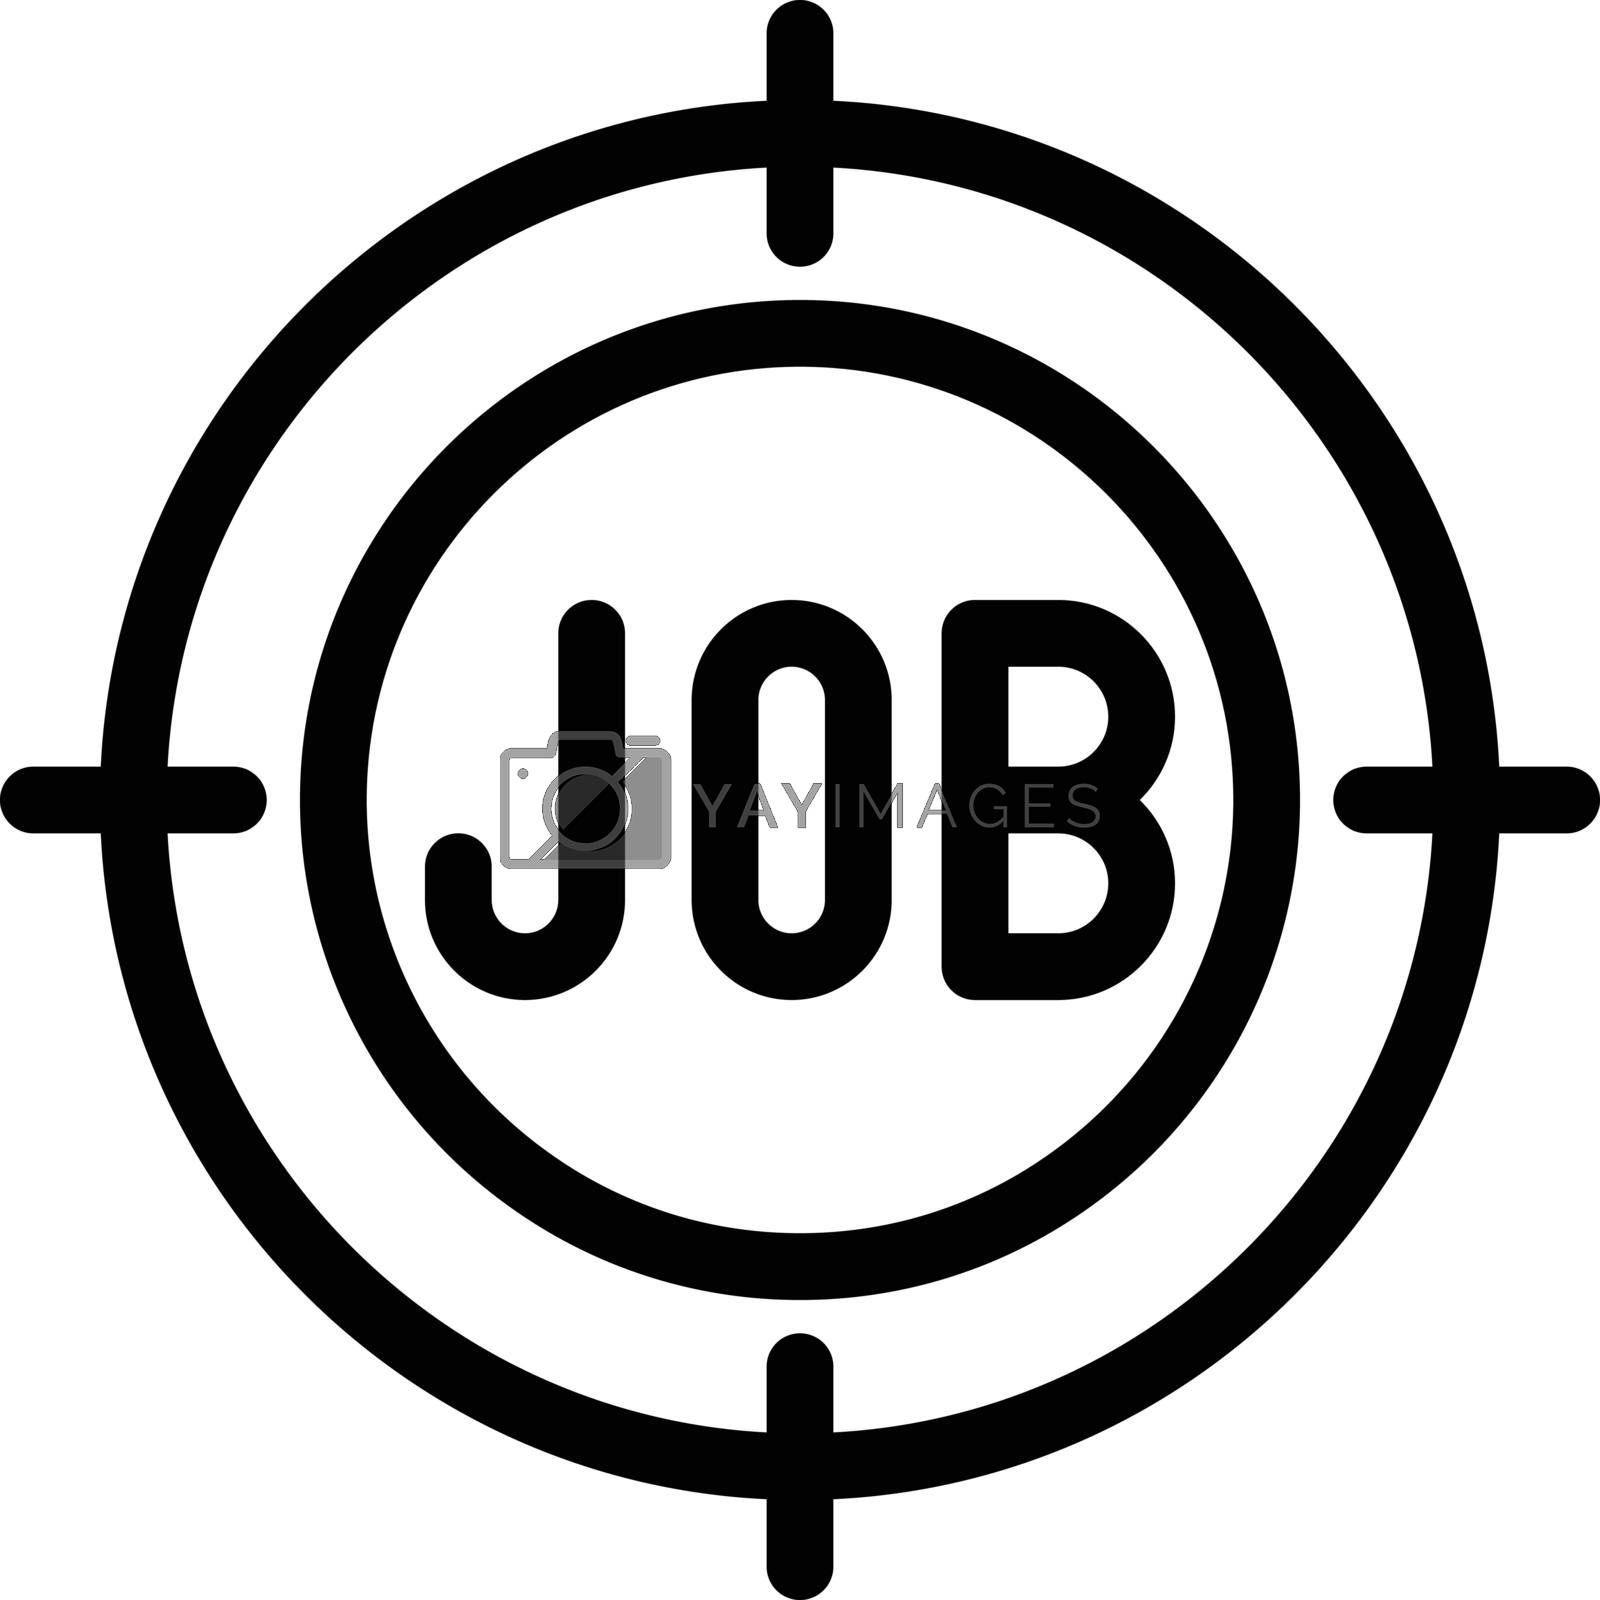 Royalty free image of Job by FlaticonsDesign